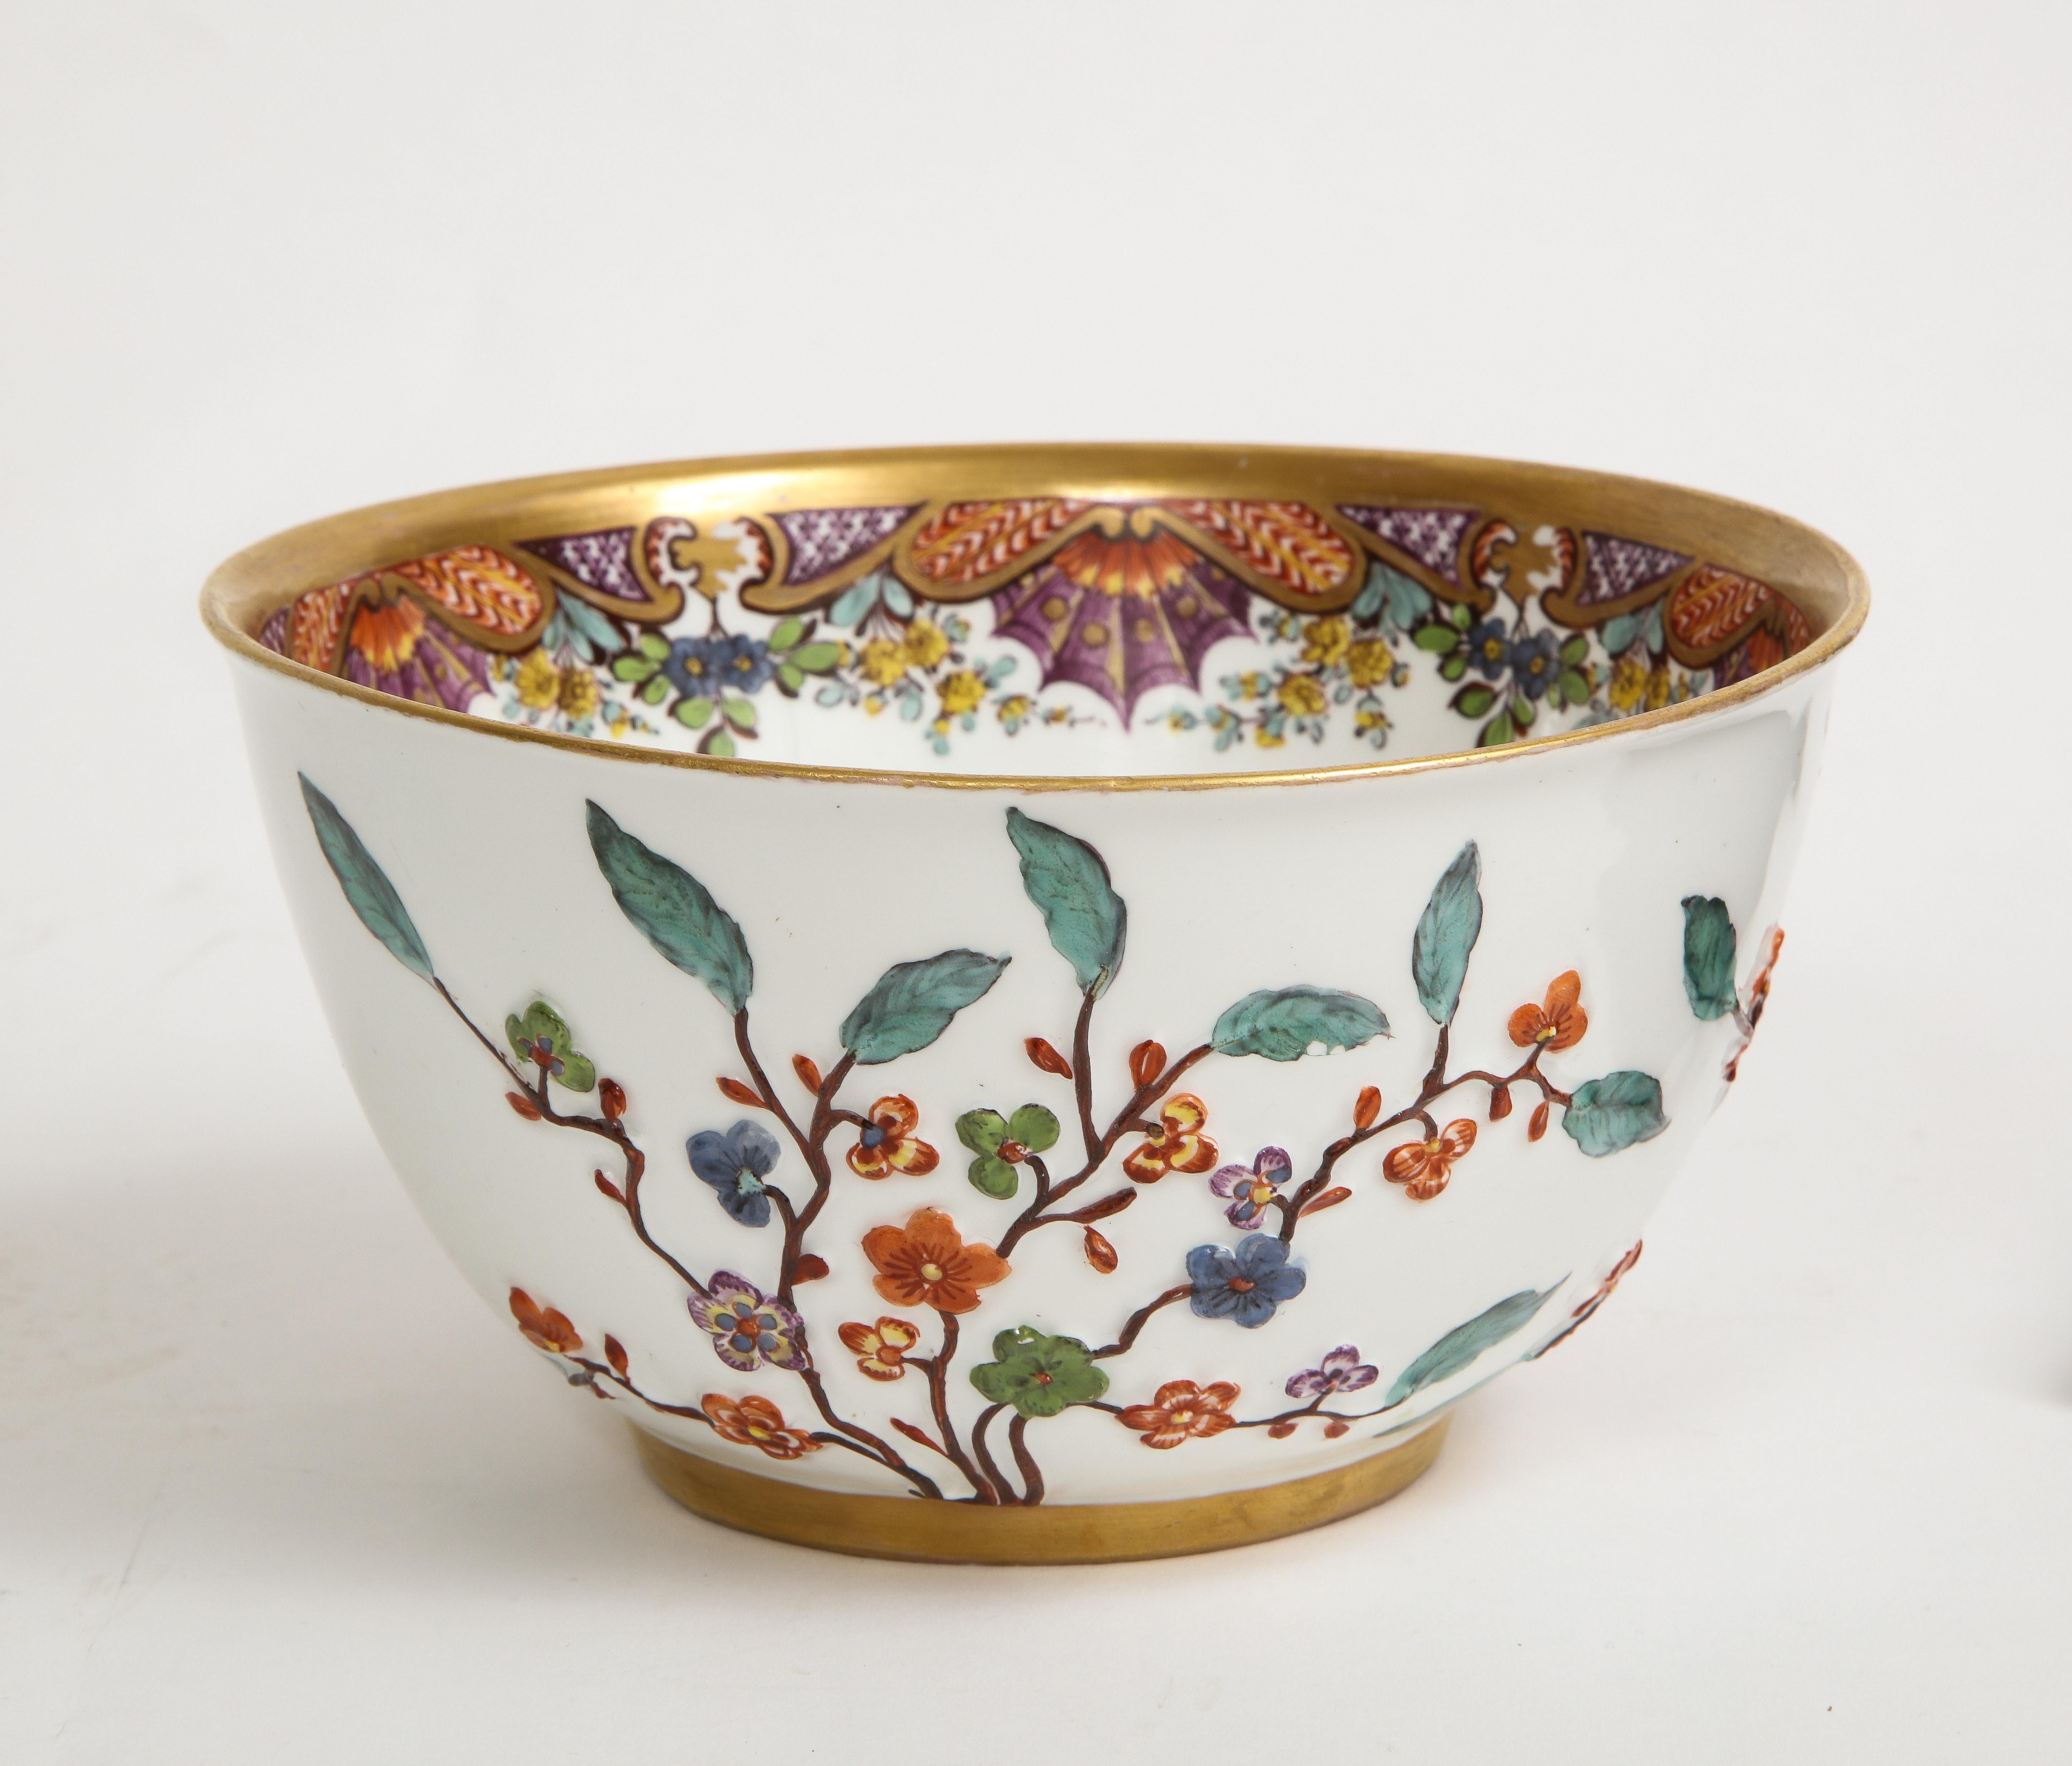 German 18th C. Meissen Hausmaler Decorated Bowl with High Relief Multi-Colored Flowers For Sale